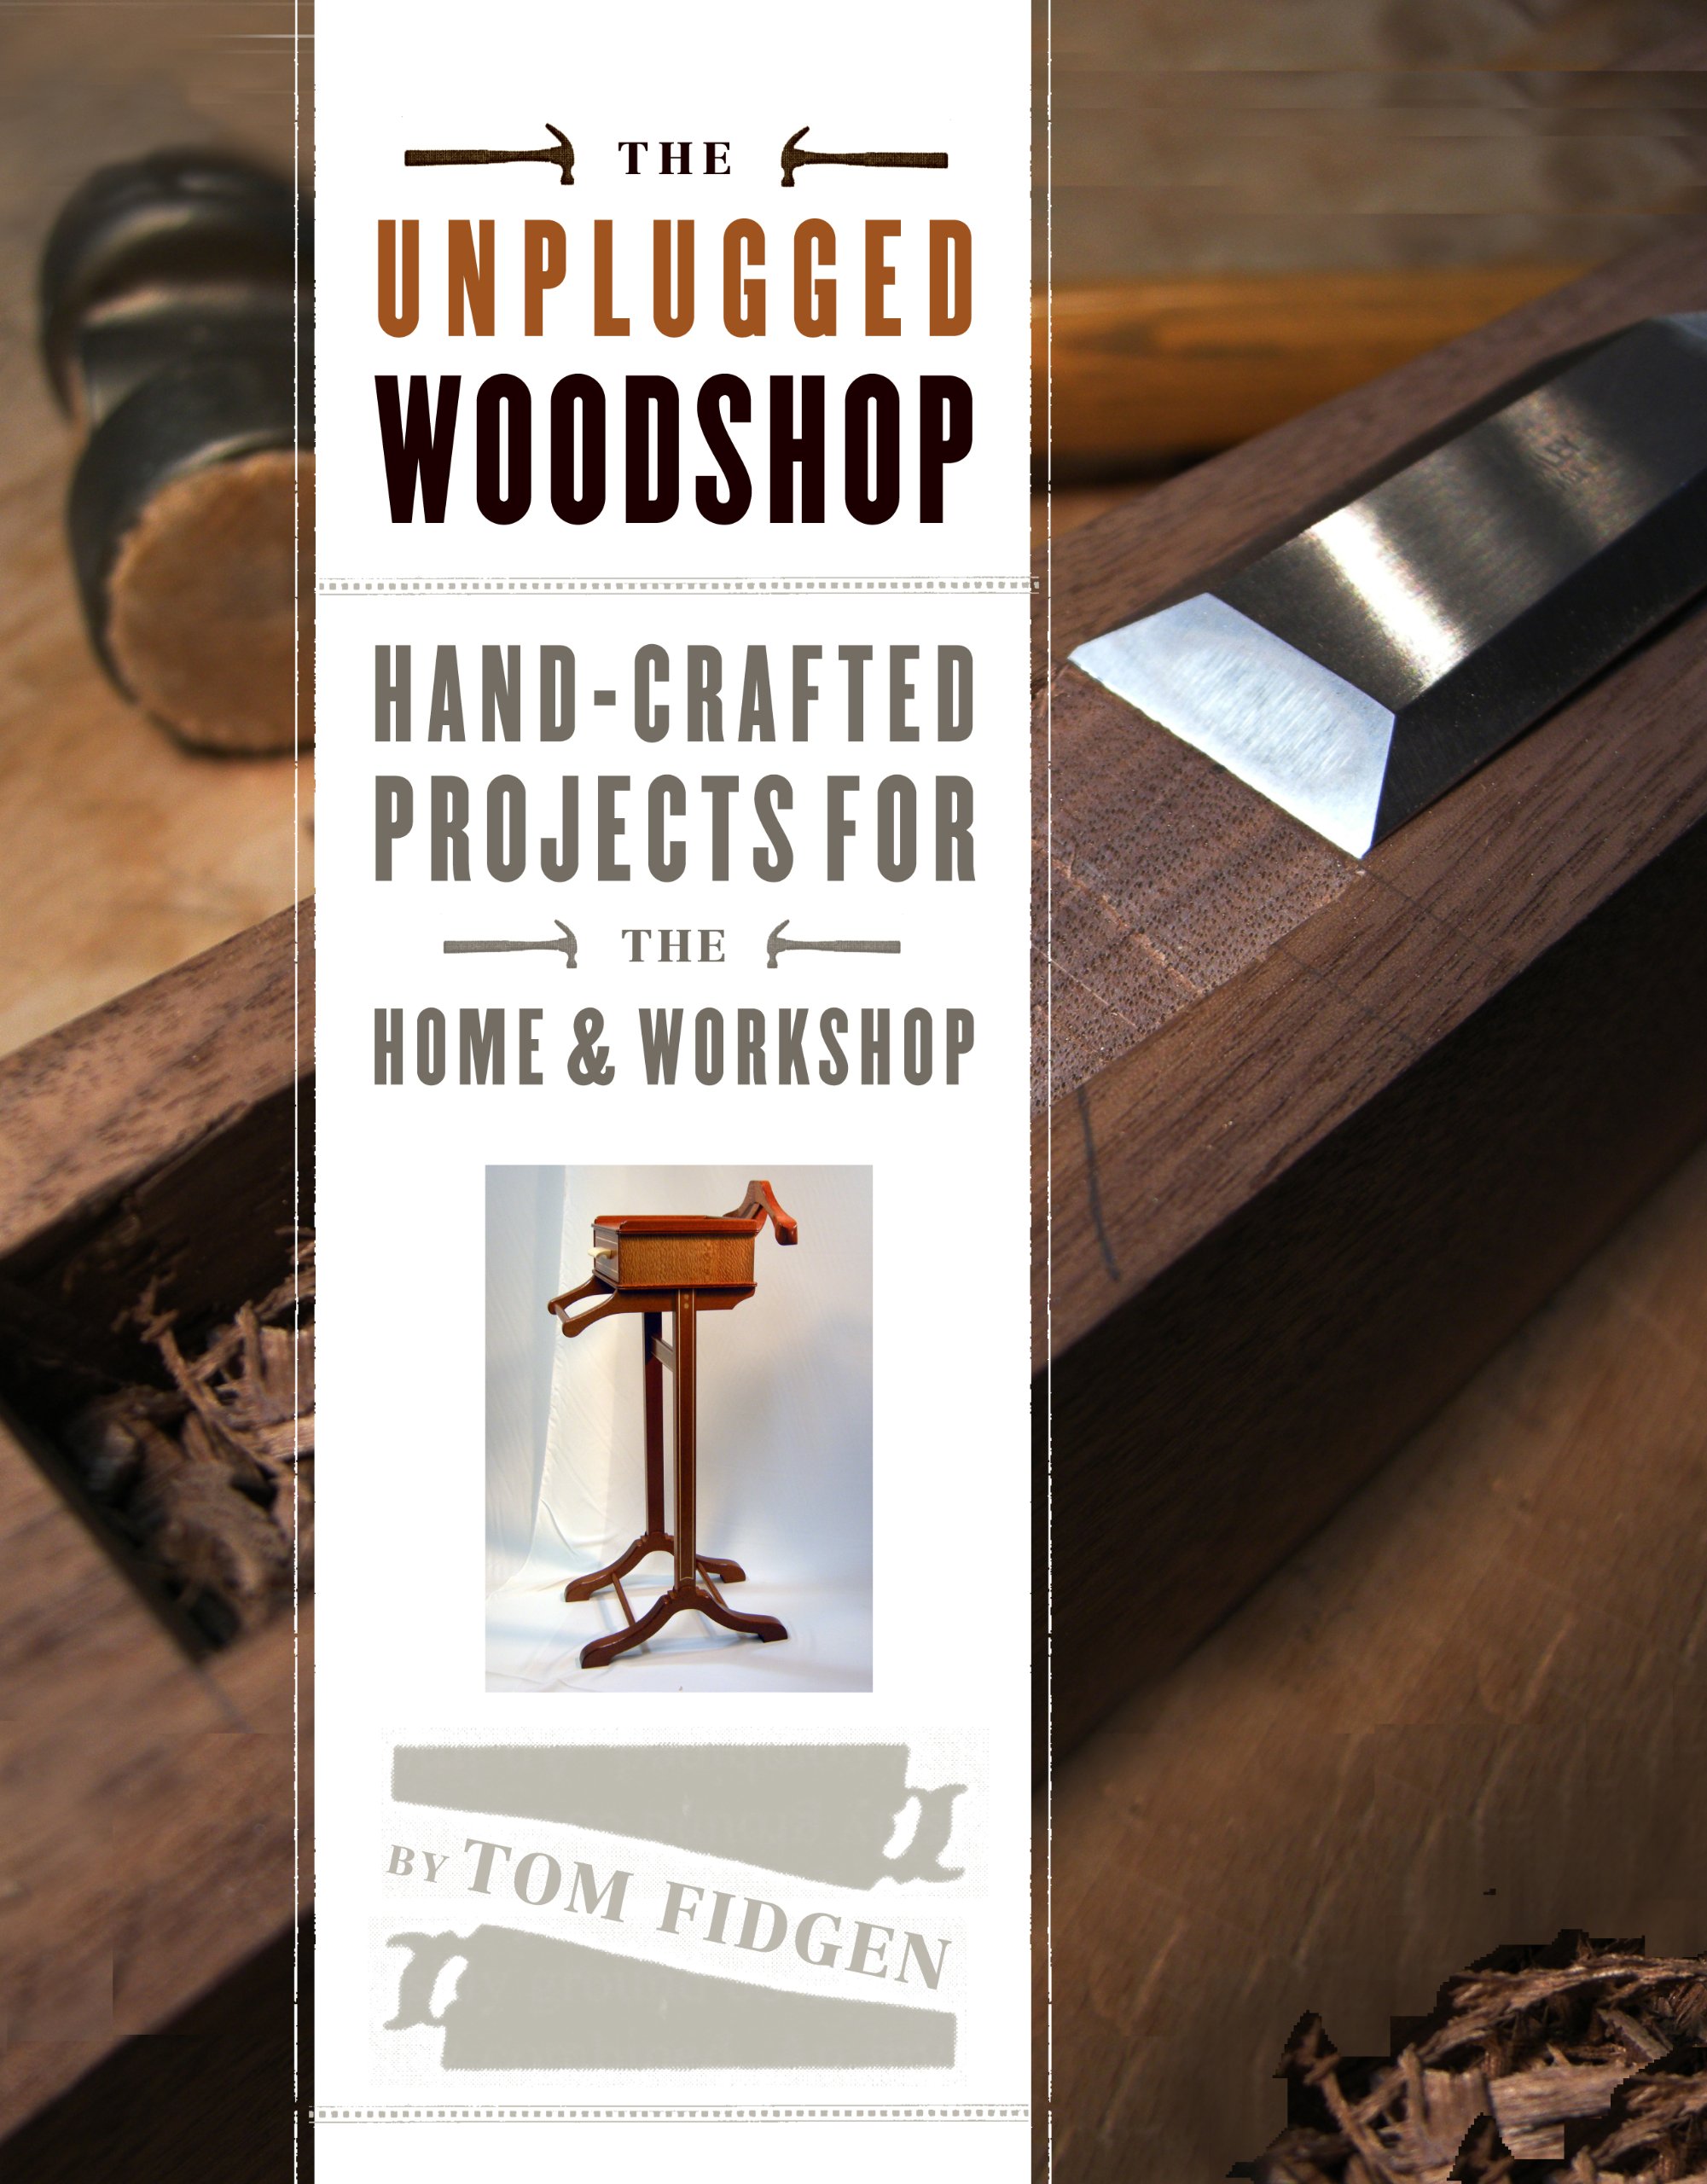 The Unplugged Woodshop: Hand-Crafted Projects for the Home %26 Workshop